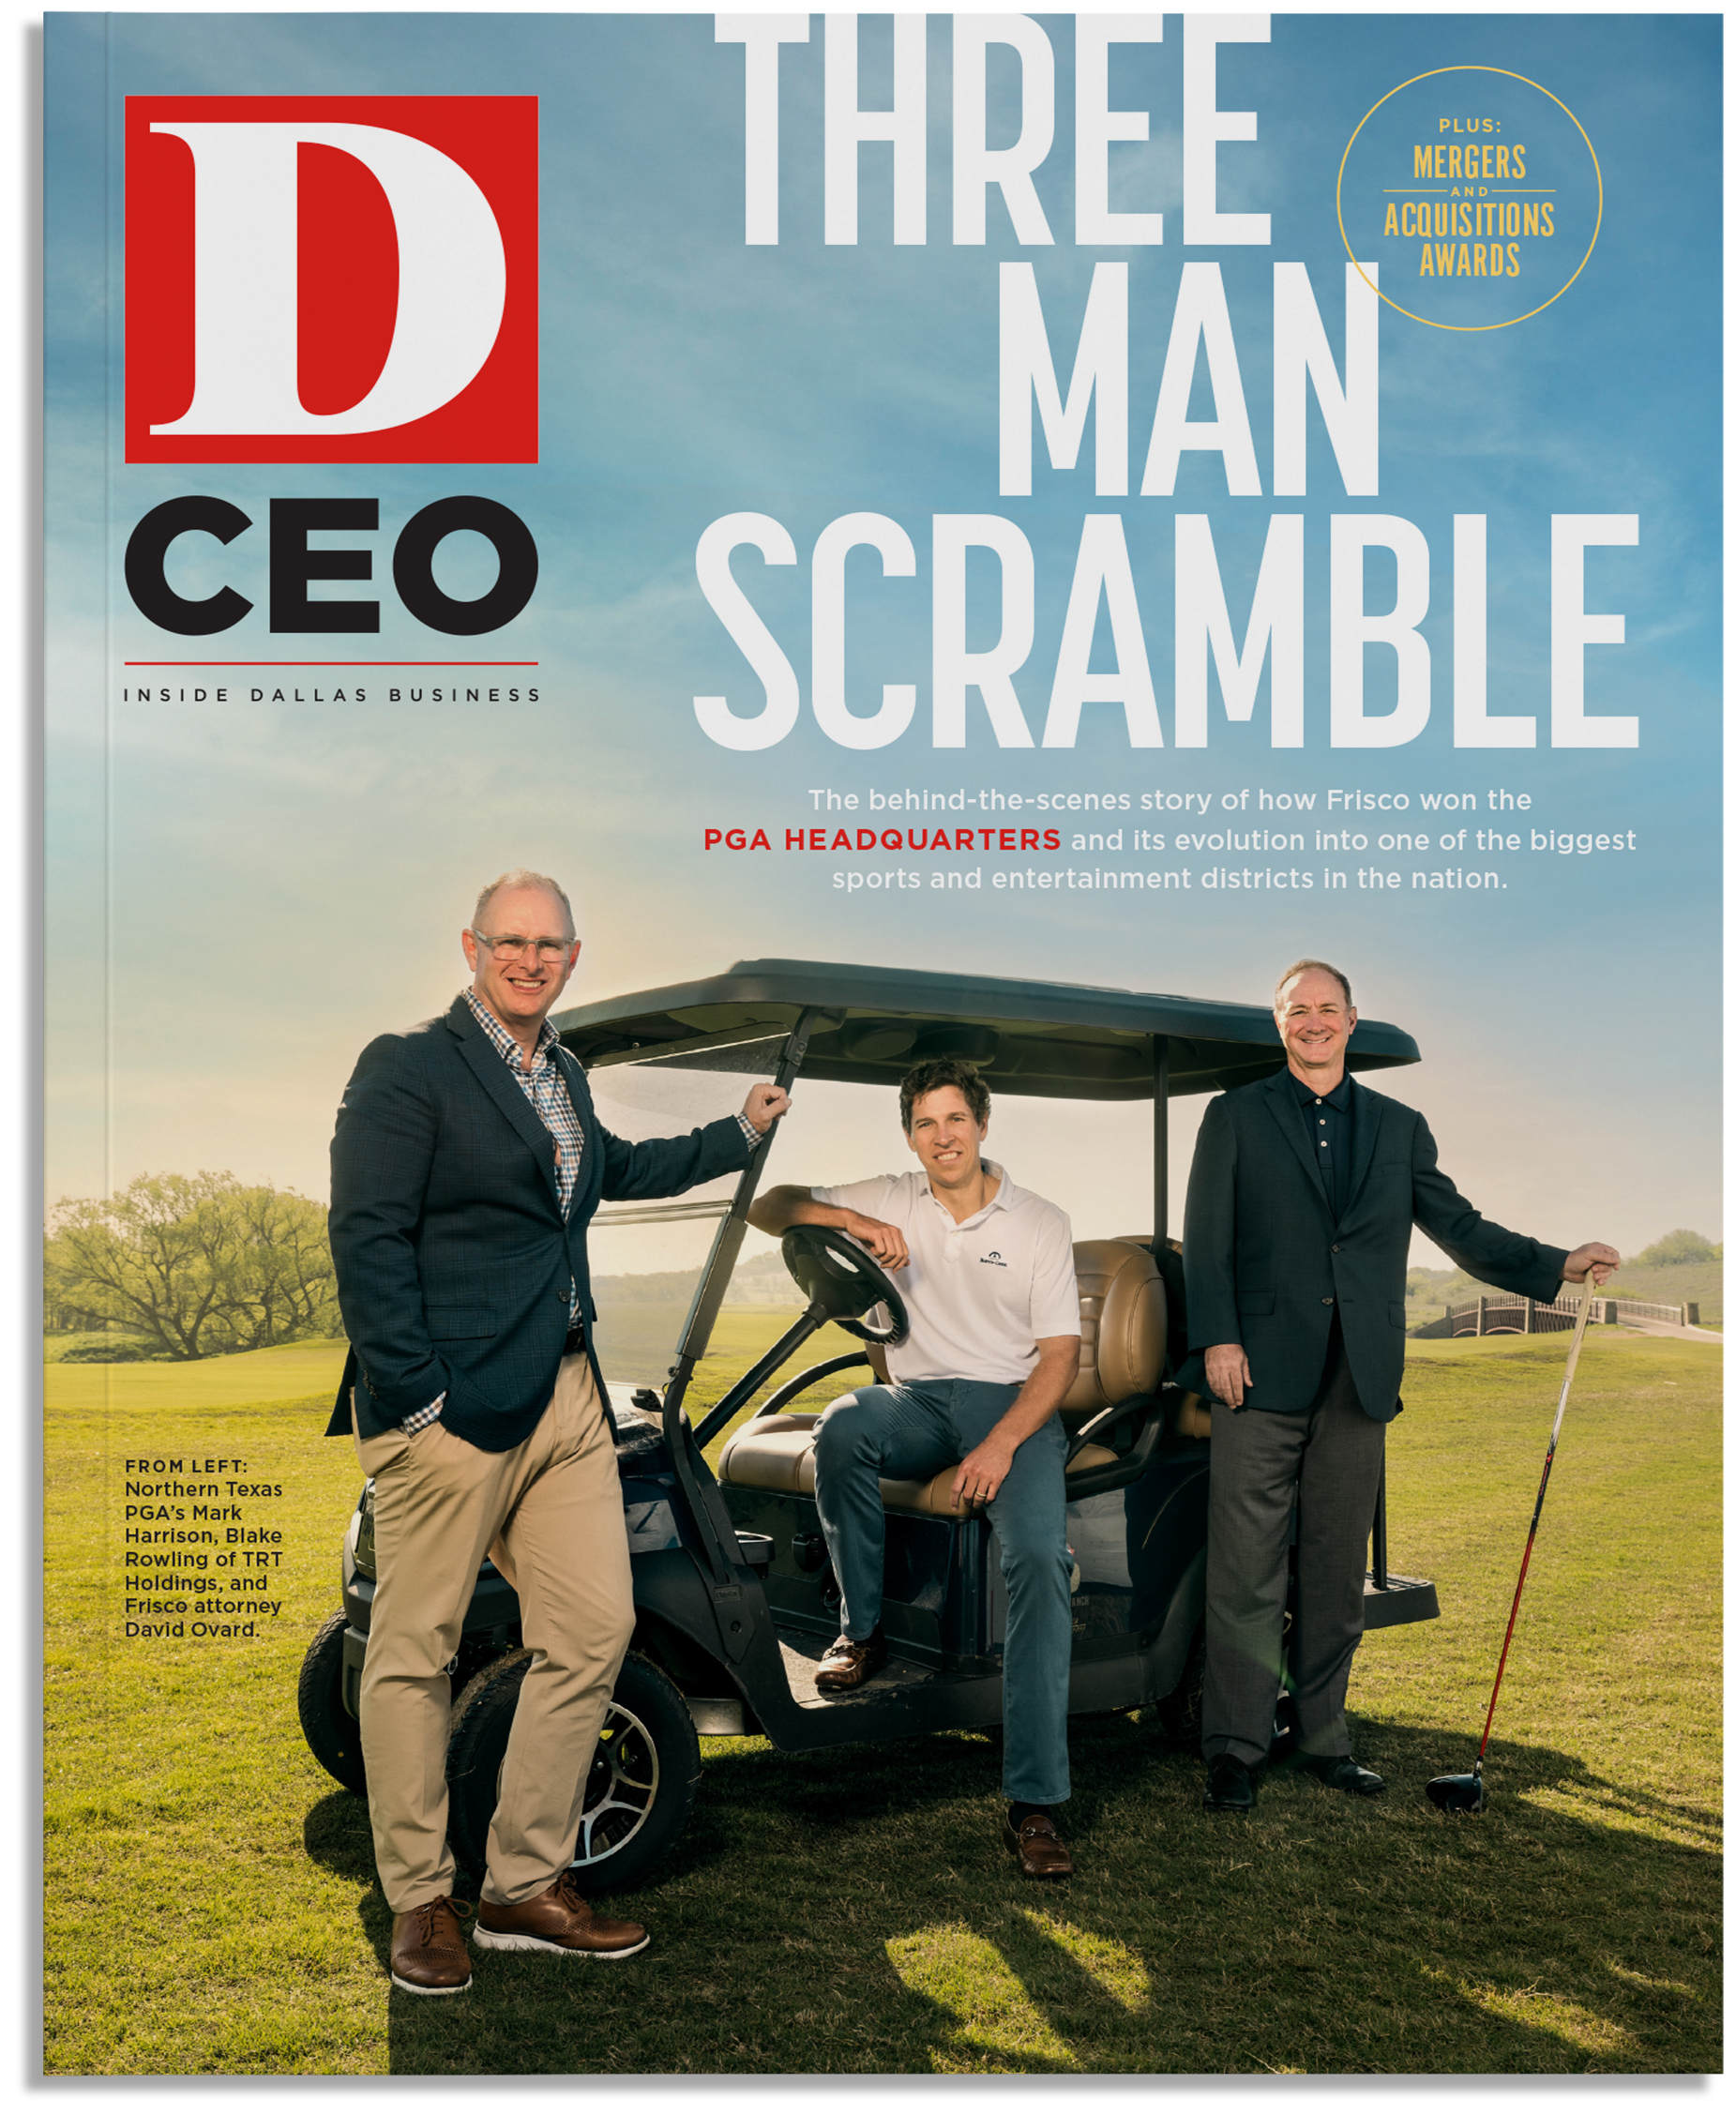 d ceo may 2023 cover